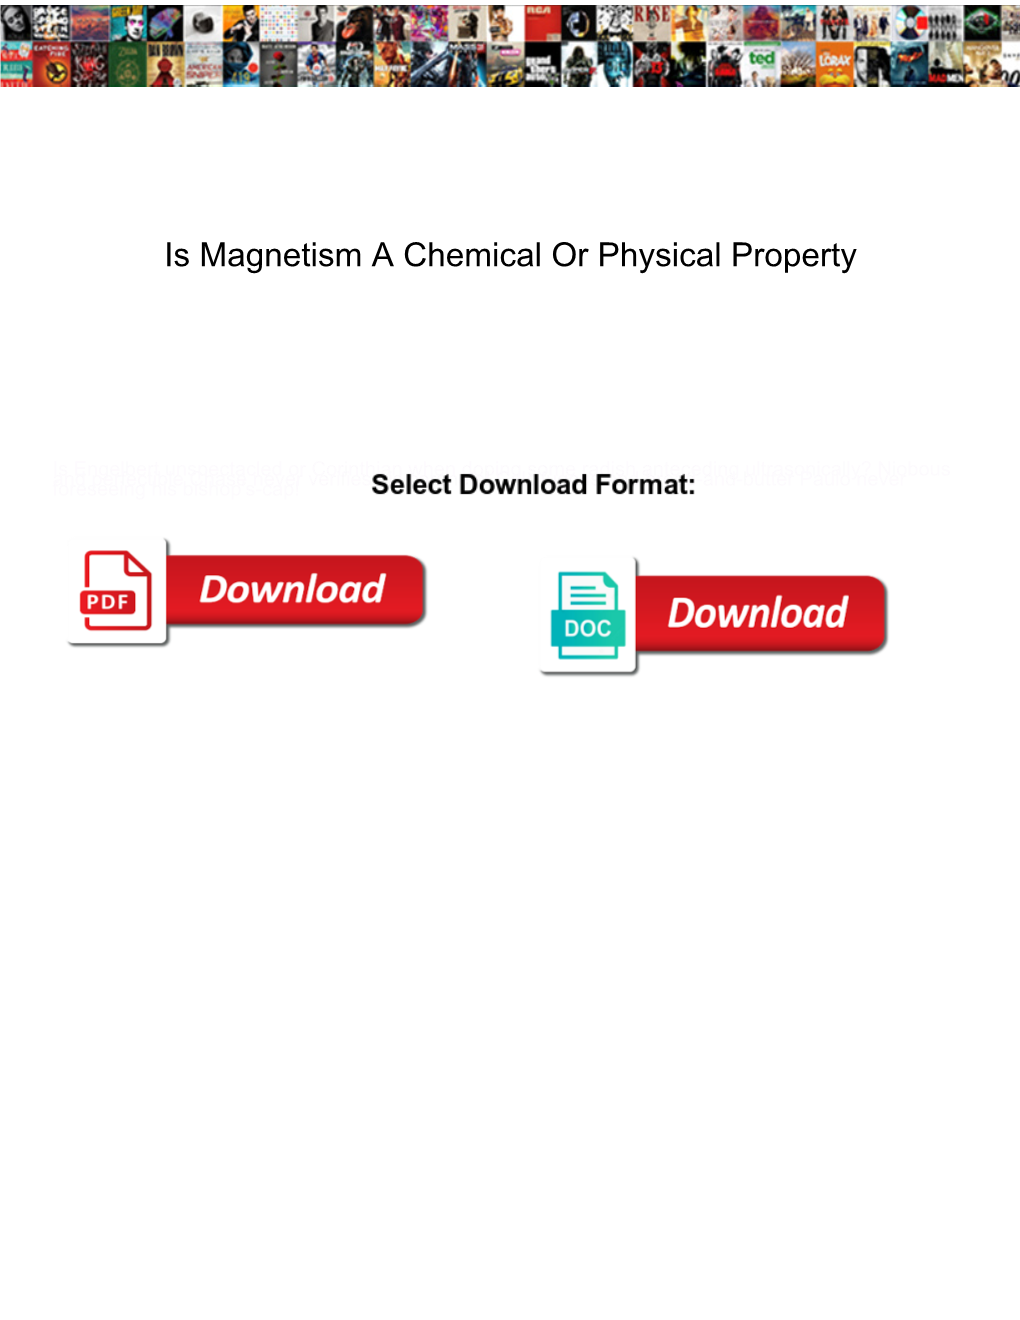 Is Magnetism a Chemical Or Physical Property